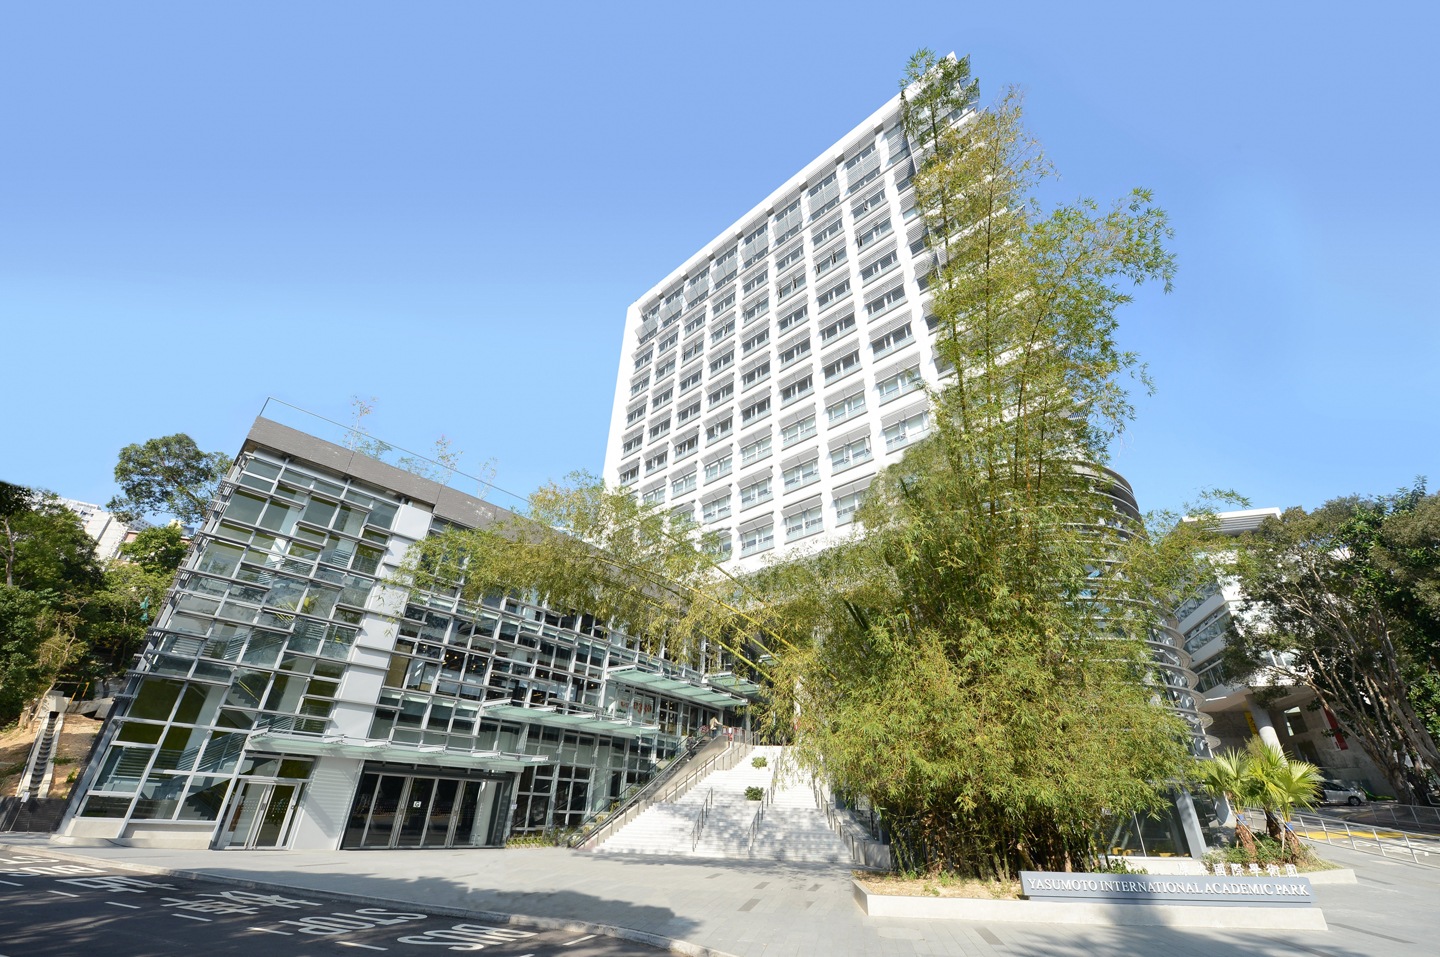 The Yasumoto International Academic Park, completed in 2012, becomes a landmark on CUHK campus